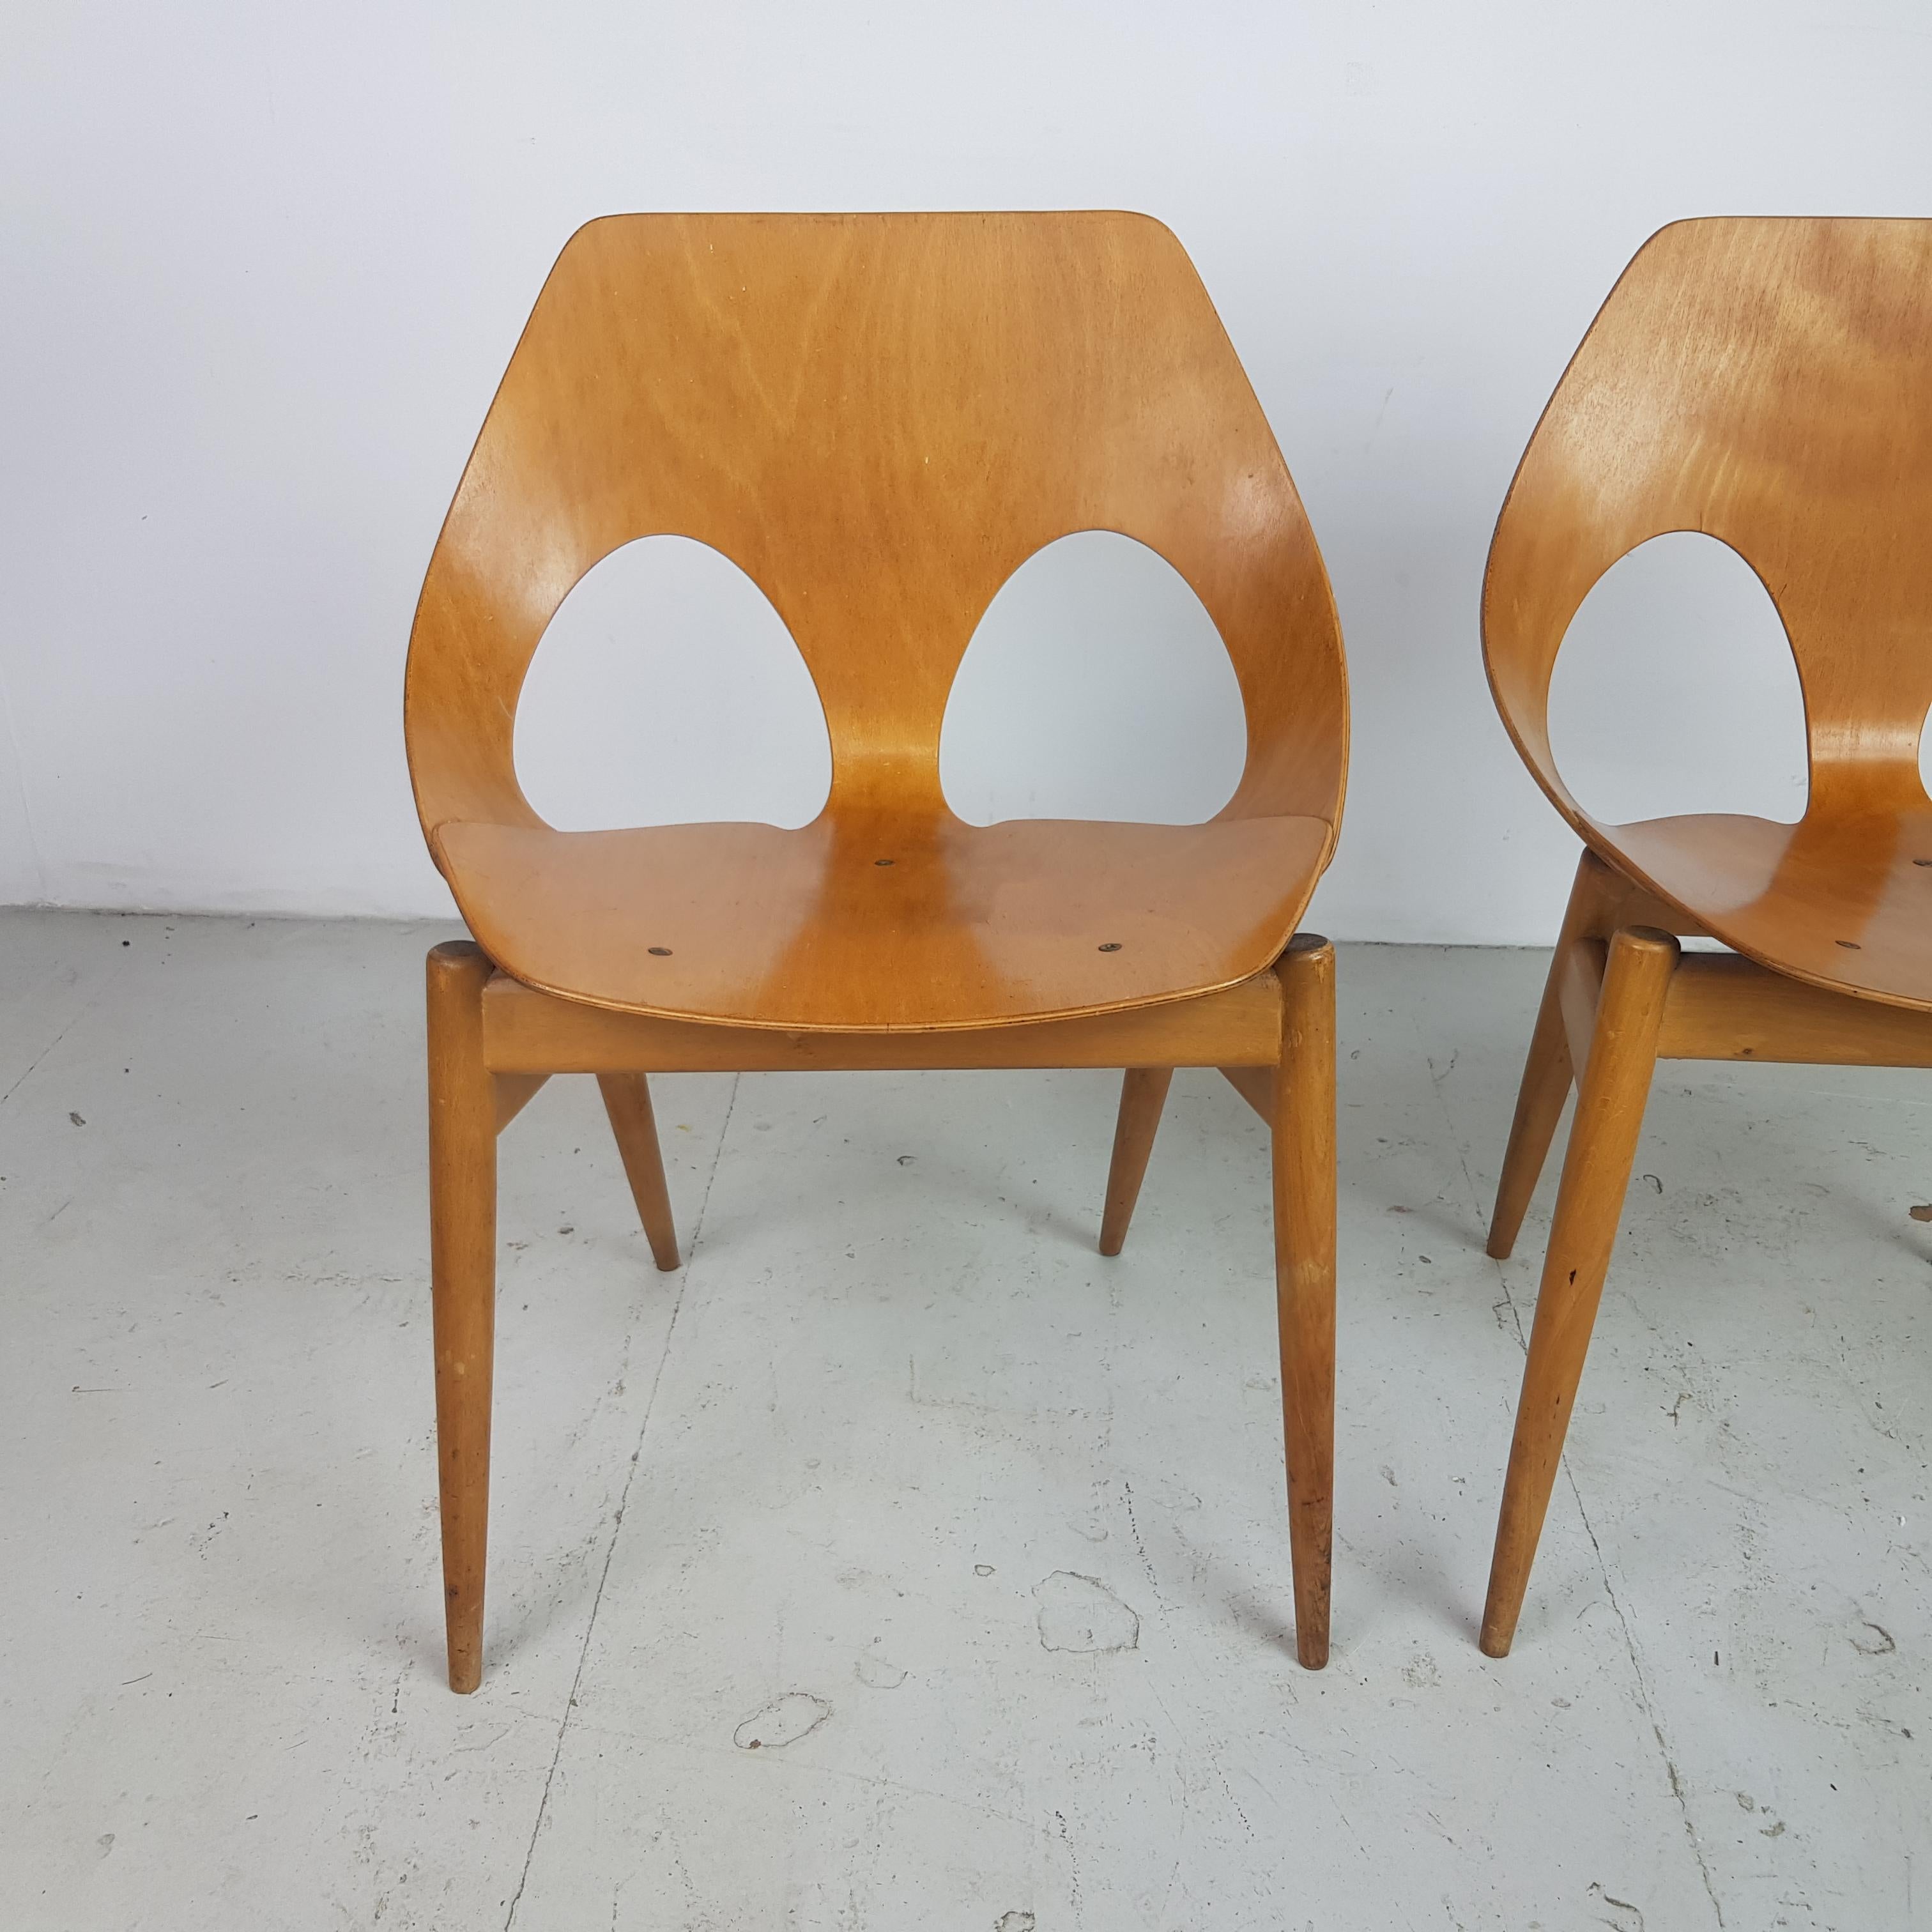 A pair of 1950s Jason chairs designed by Carl Jacobs & Frank Guille for Kandya.

The Jason chair was designed by the Danish designer Carl Jacobs but was manufactured by Kandya, a British firm. This lightweight, stackable, chair has gently tapering